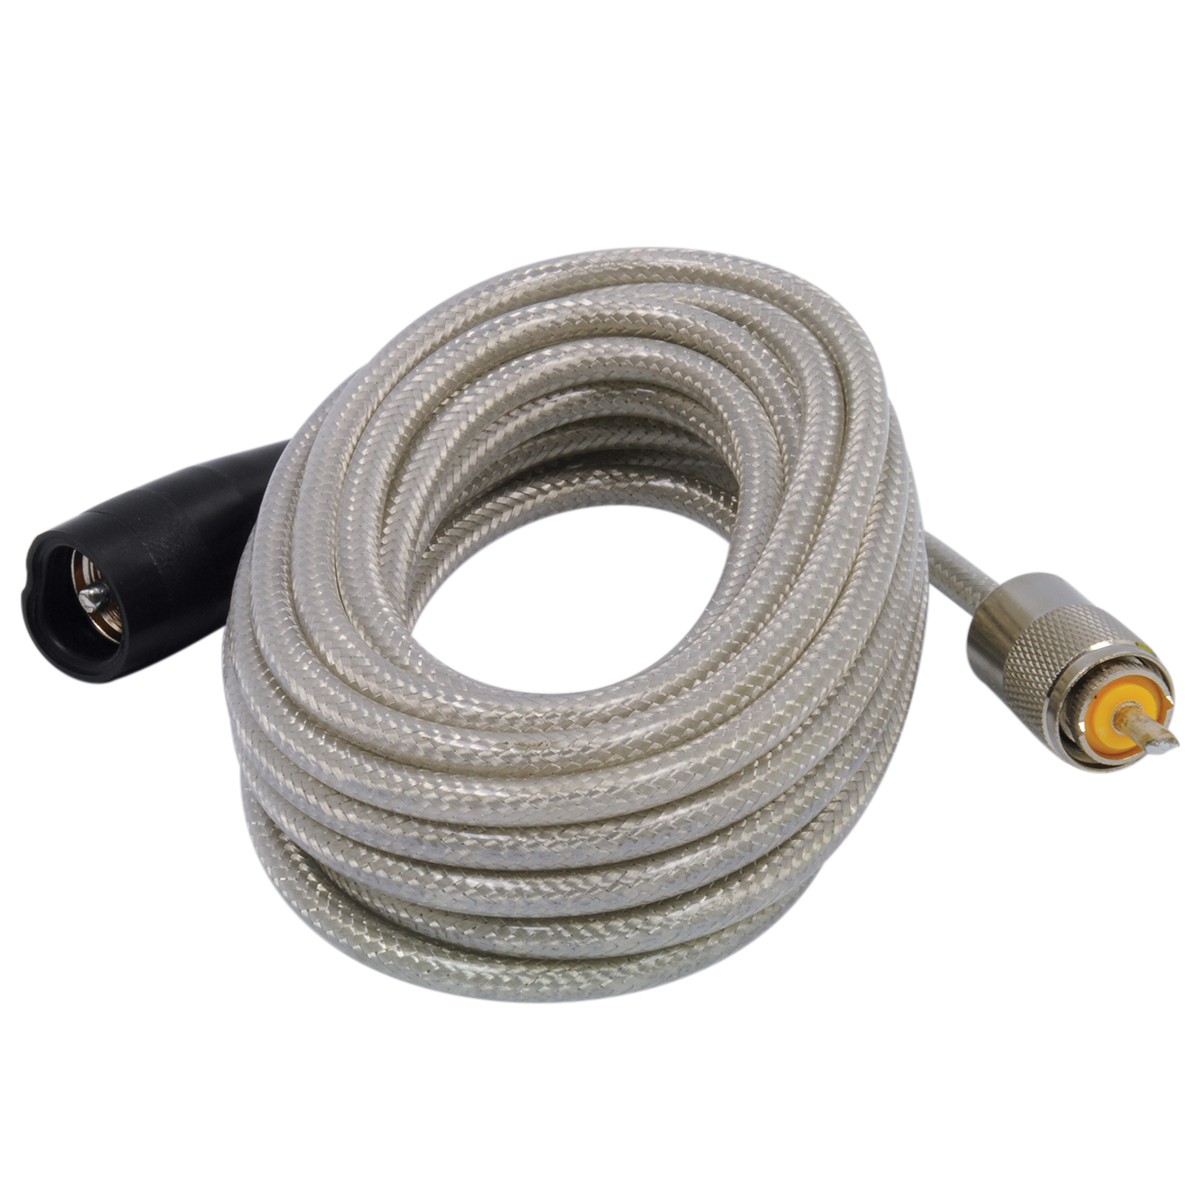 18ft Coax Cable with PL-259 Connectors